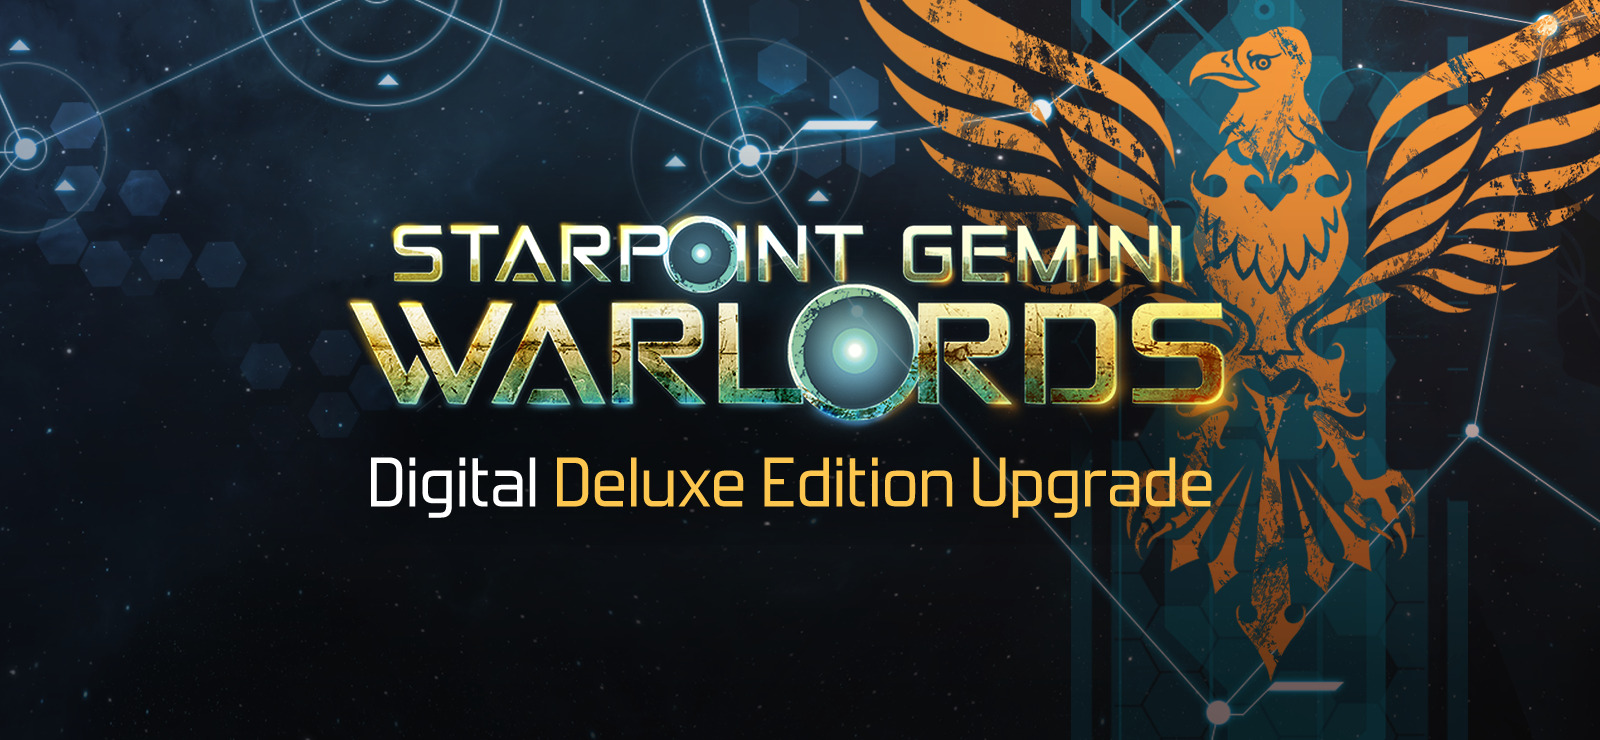 66 Starpoint Gemini Warlords Digital Deluxe Upgrade On Gog Com